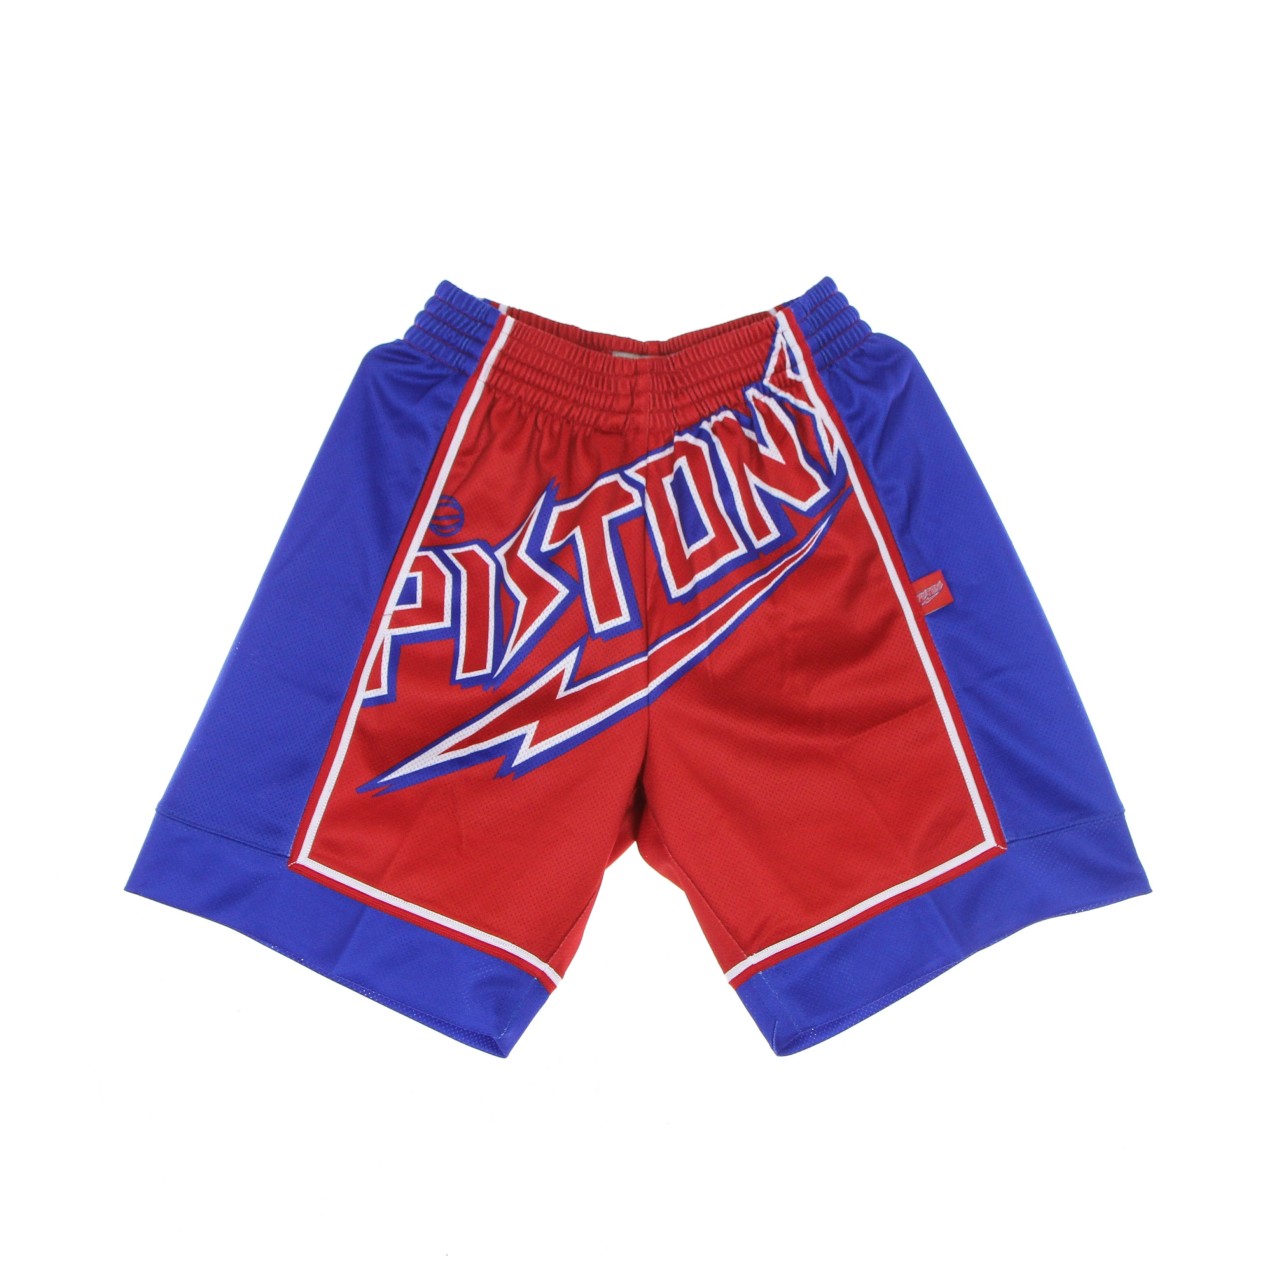 MITCHELL & NESS NBA BIG FACE BLOWN OUT FASHION SHORT HARDWOOD CLASSICS DETPIS SHORBW19147-DPIRED1